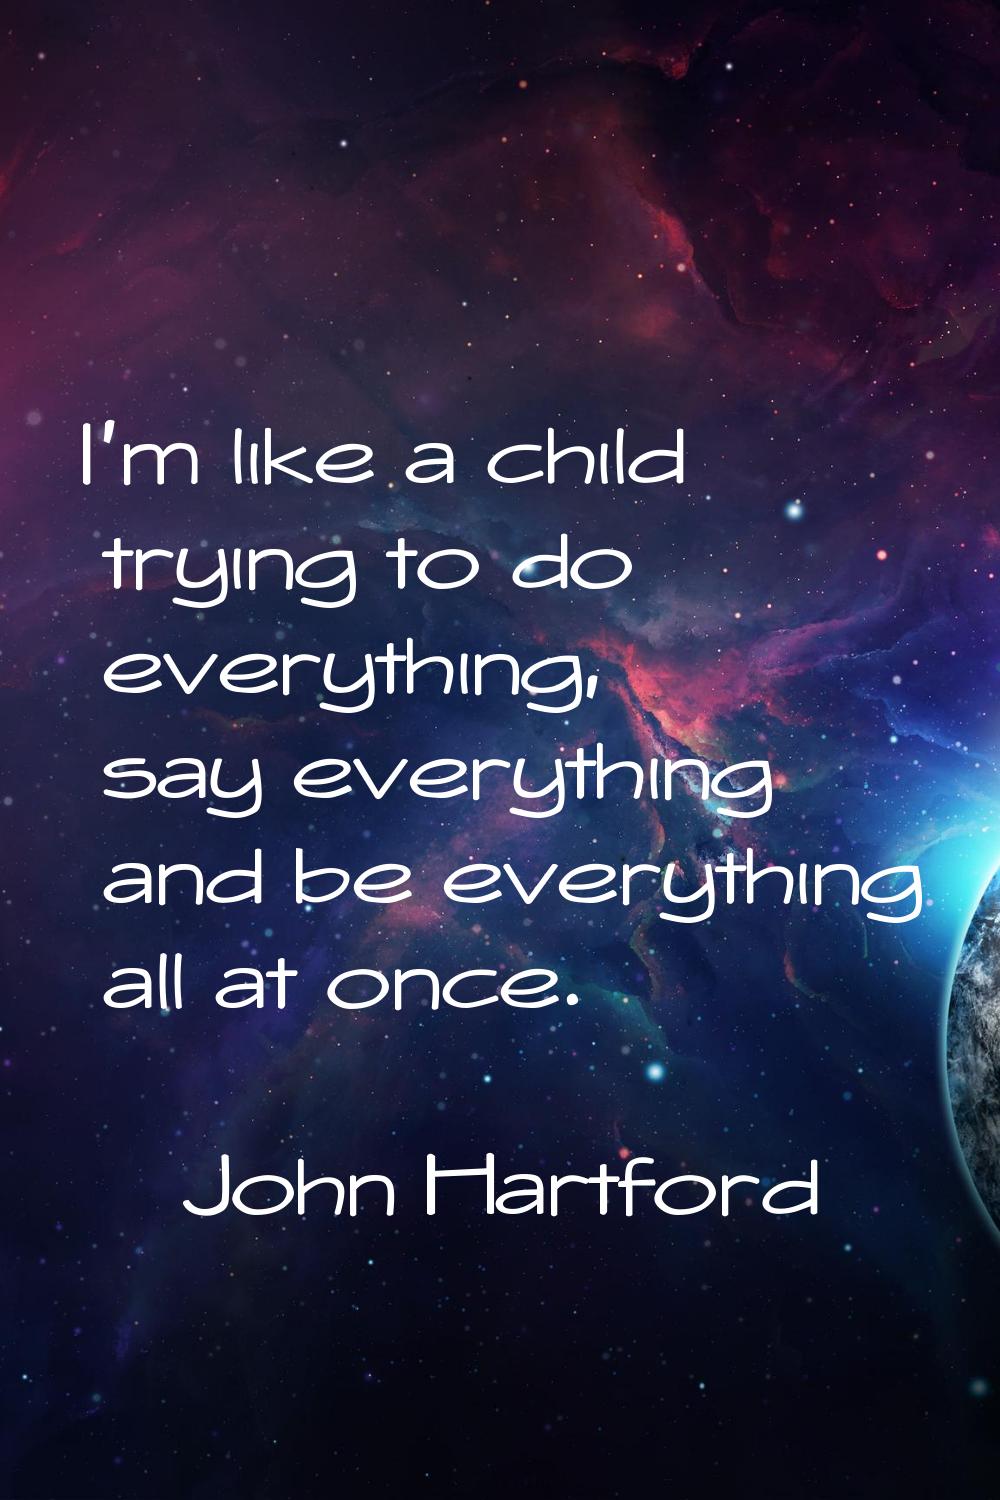 I'm like a child trying to do everything, say everything and be everything all at once.